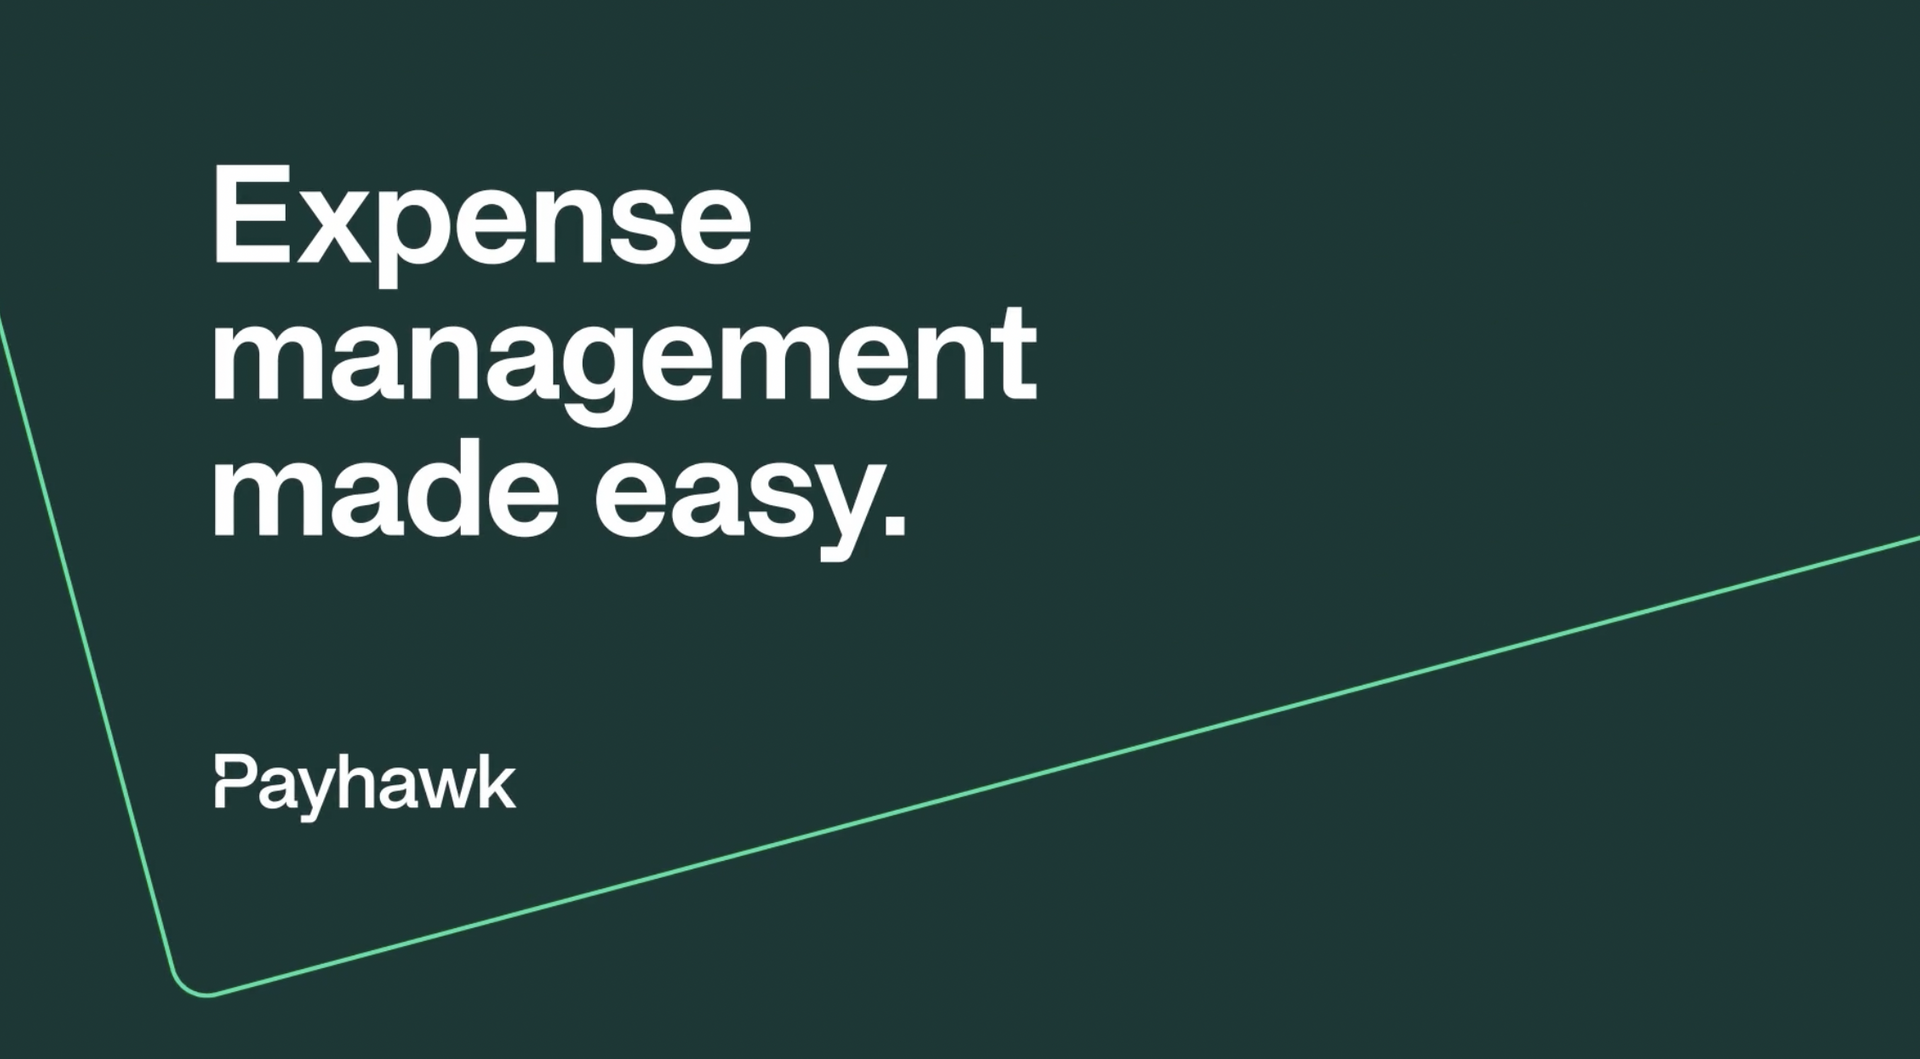 Video: expense management made easy with Payhawk